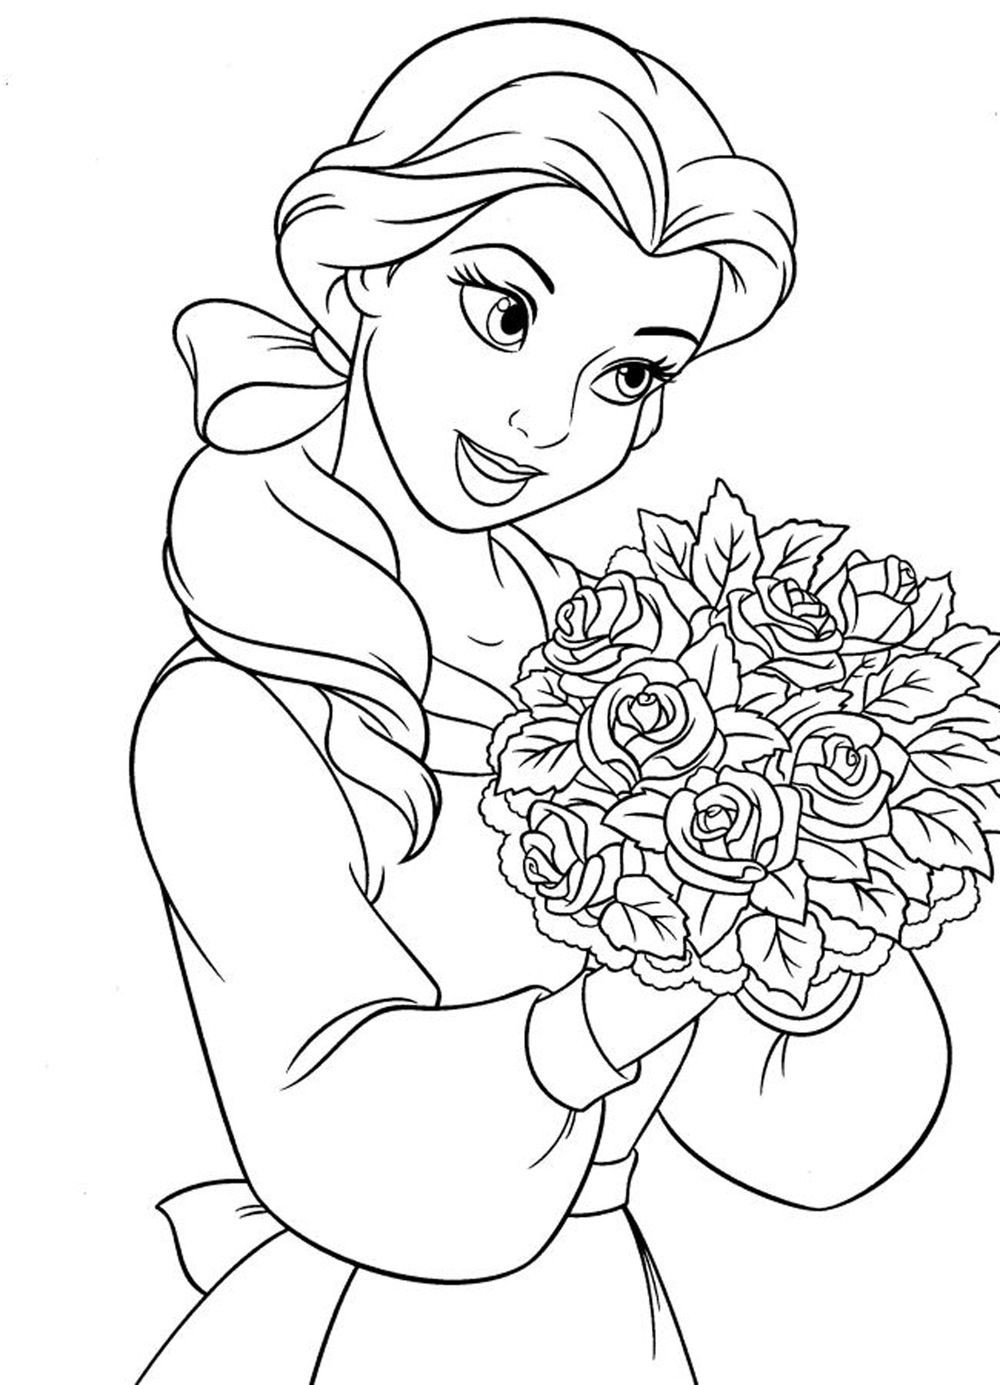 Coloring Pages For Girls To Print
 princess coloring pages for girls Free